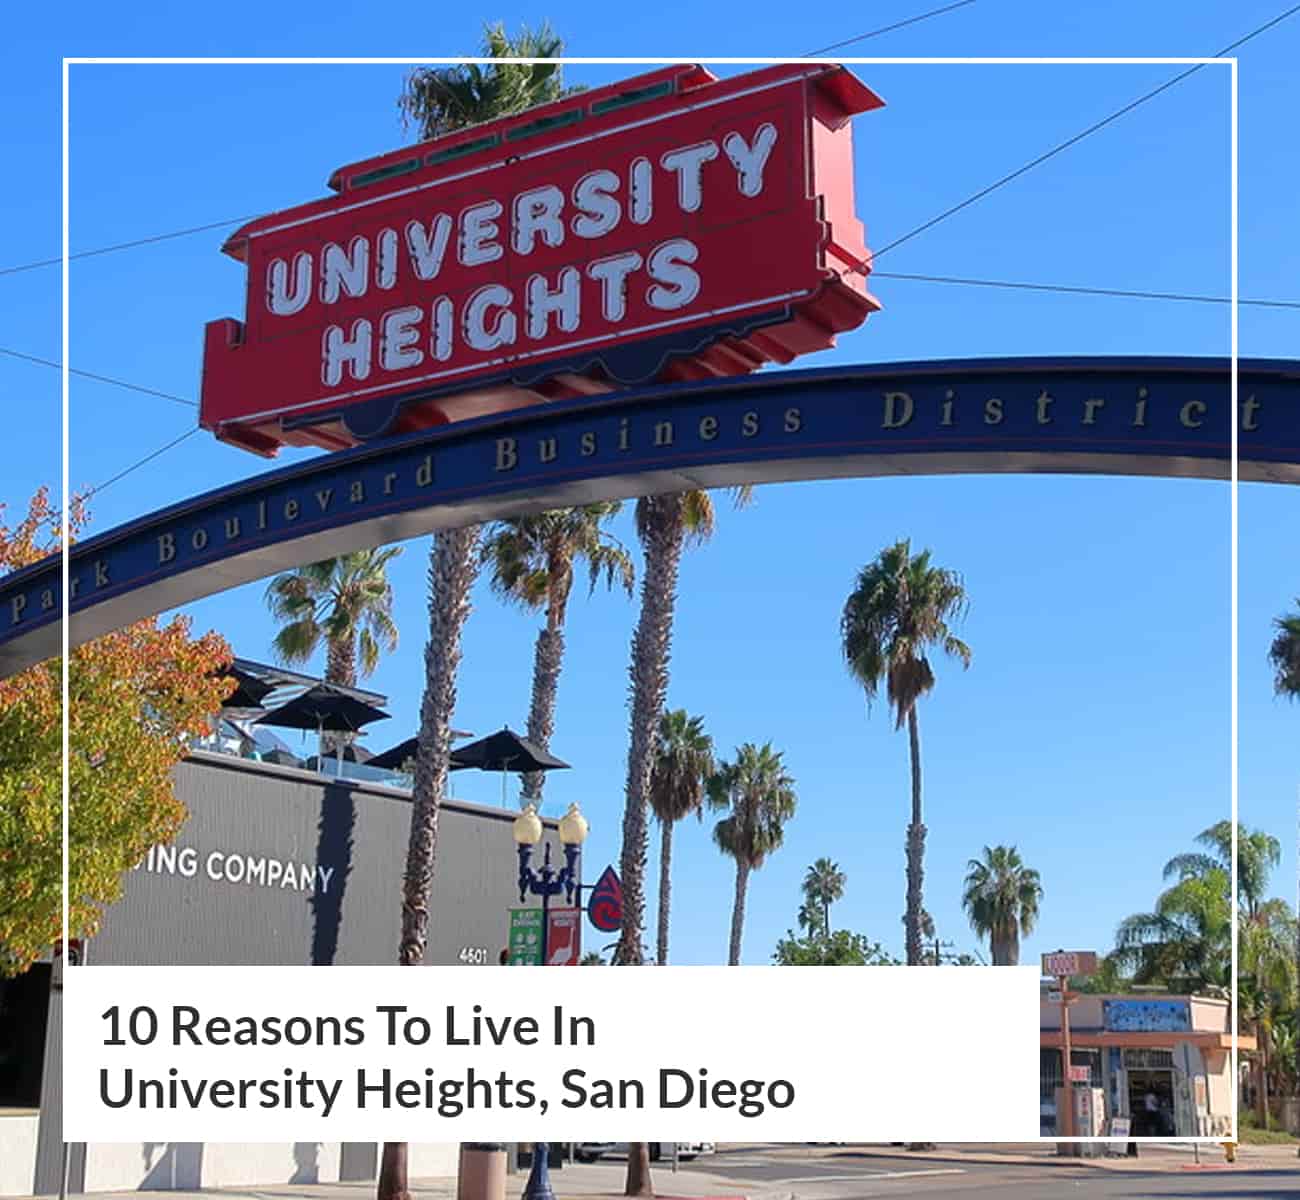 Moving to University Heights